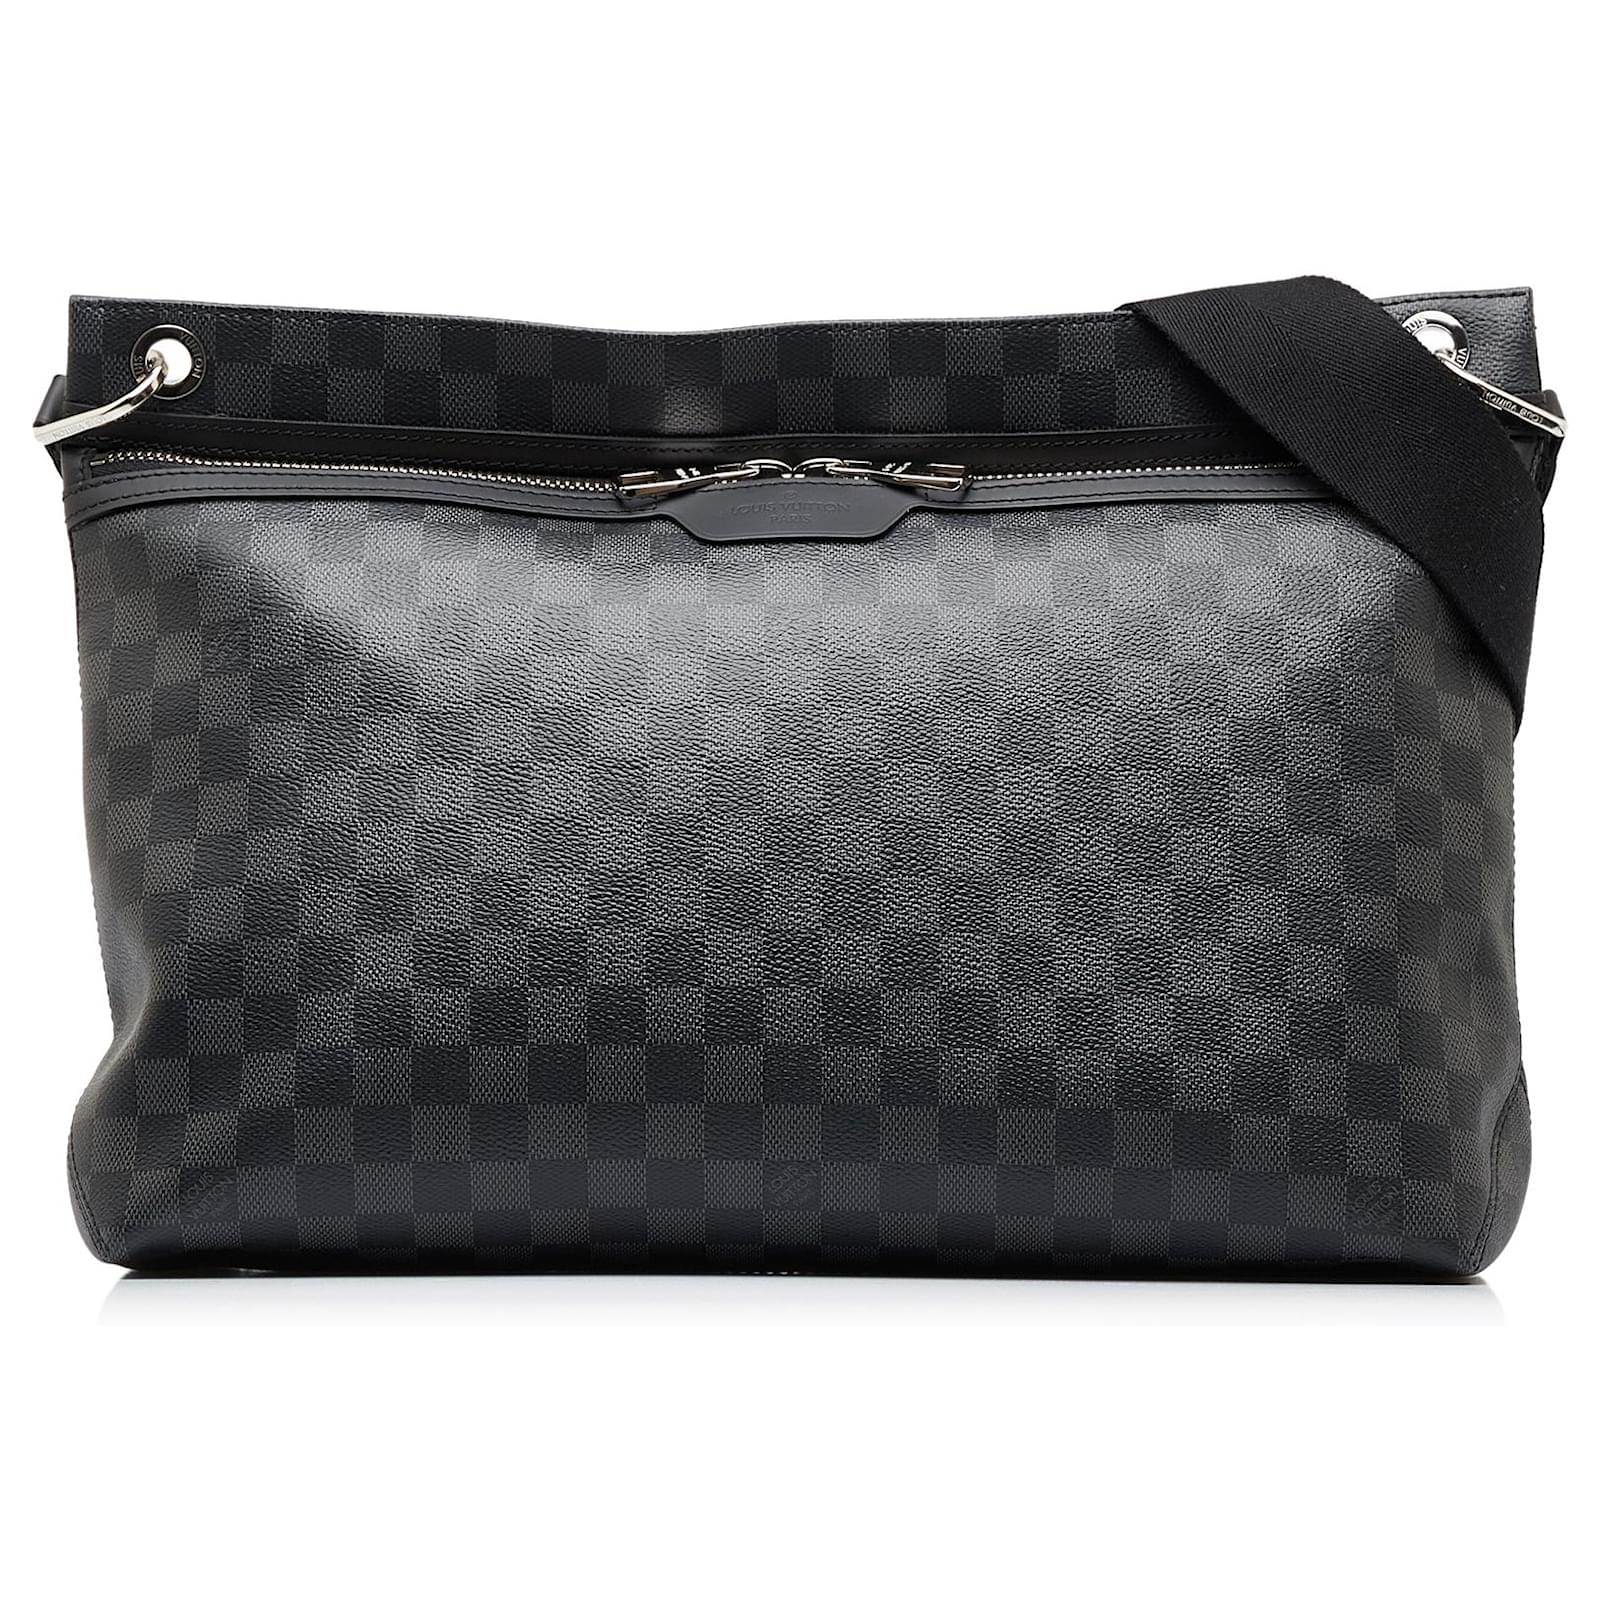 Louis Vuitton Brera Bag in damier canvas and ebony leather